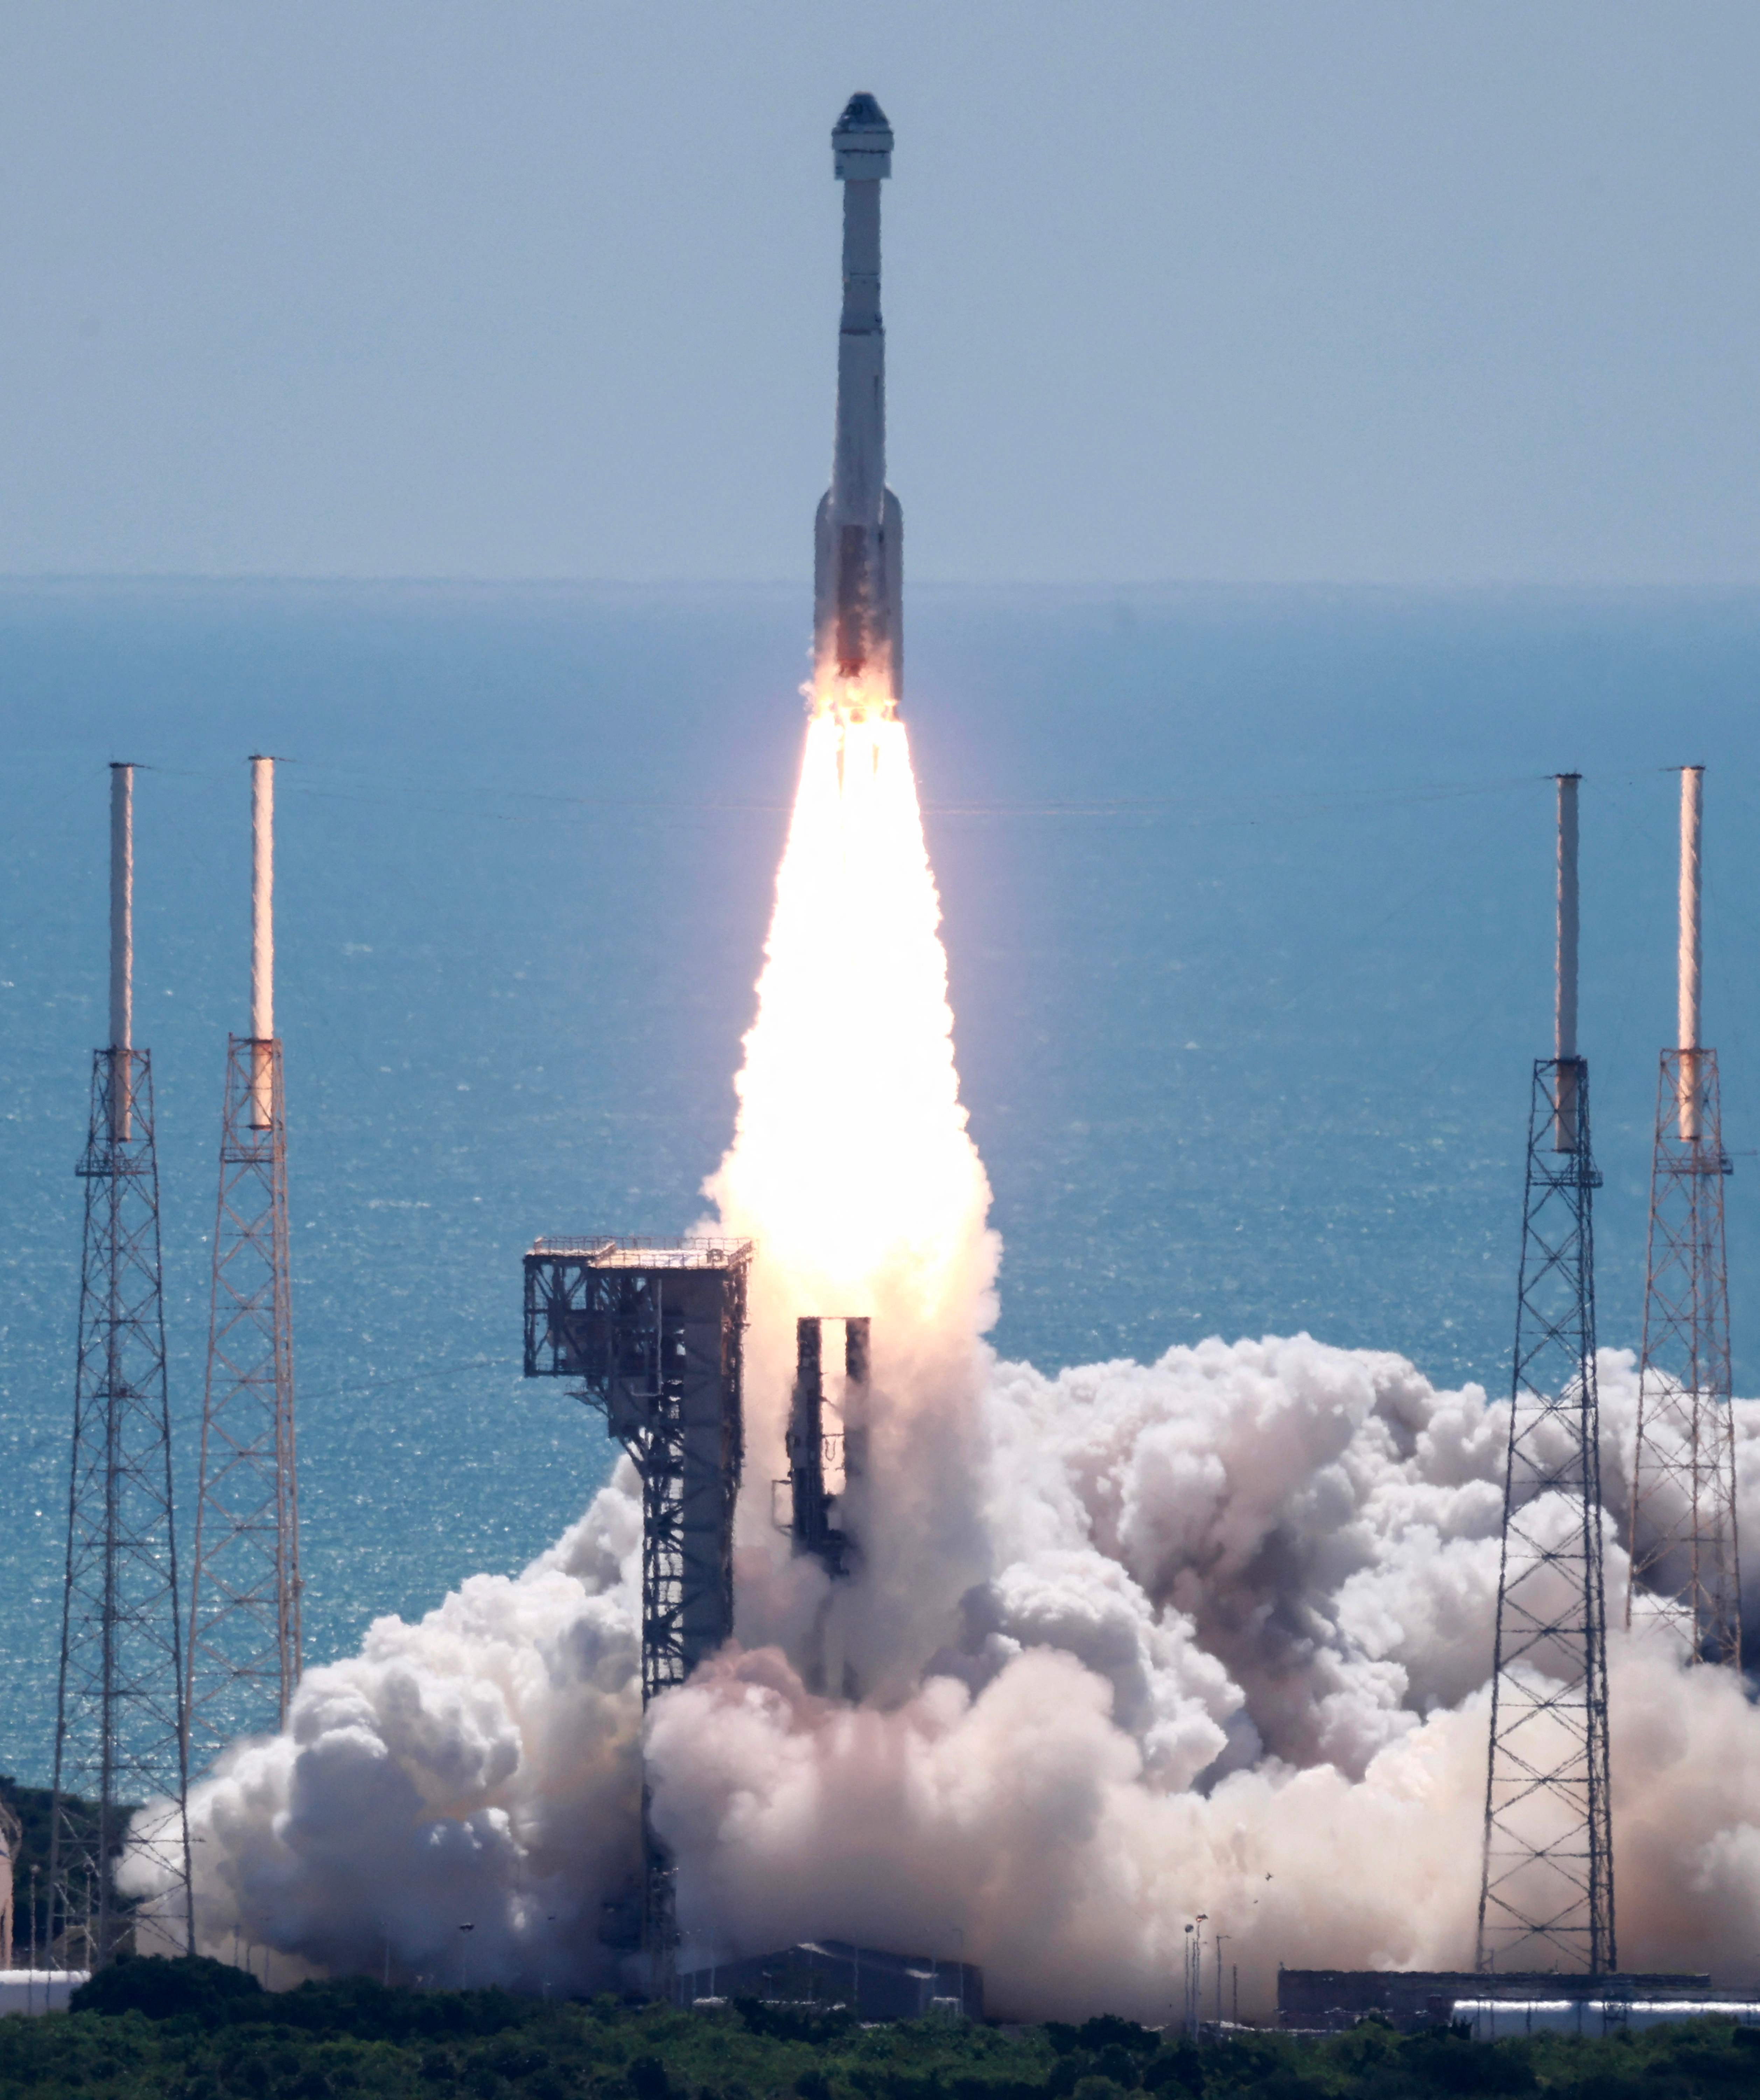 CAPE CANAVERAL, FLORIDA - JUNE 05: Boeings Starliner spacecraft atop a United Launch Alliance Atlas V rocket lifts off from Space Launch Complex 41 during NASAs Boeing Crew Flight Test on June 05, 2024, in Cape Canaveral, Florida. The mission is sending two astronauts to the International Space Station.   Joe Raedle/Getty Images/AFP (Photo by JOE RAEDLE / GETTY IMAGES NORTH AMERICA / Getty Images via AFP)